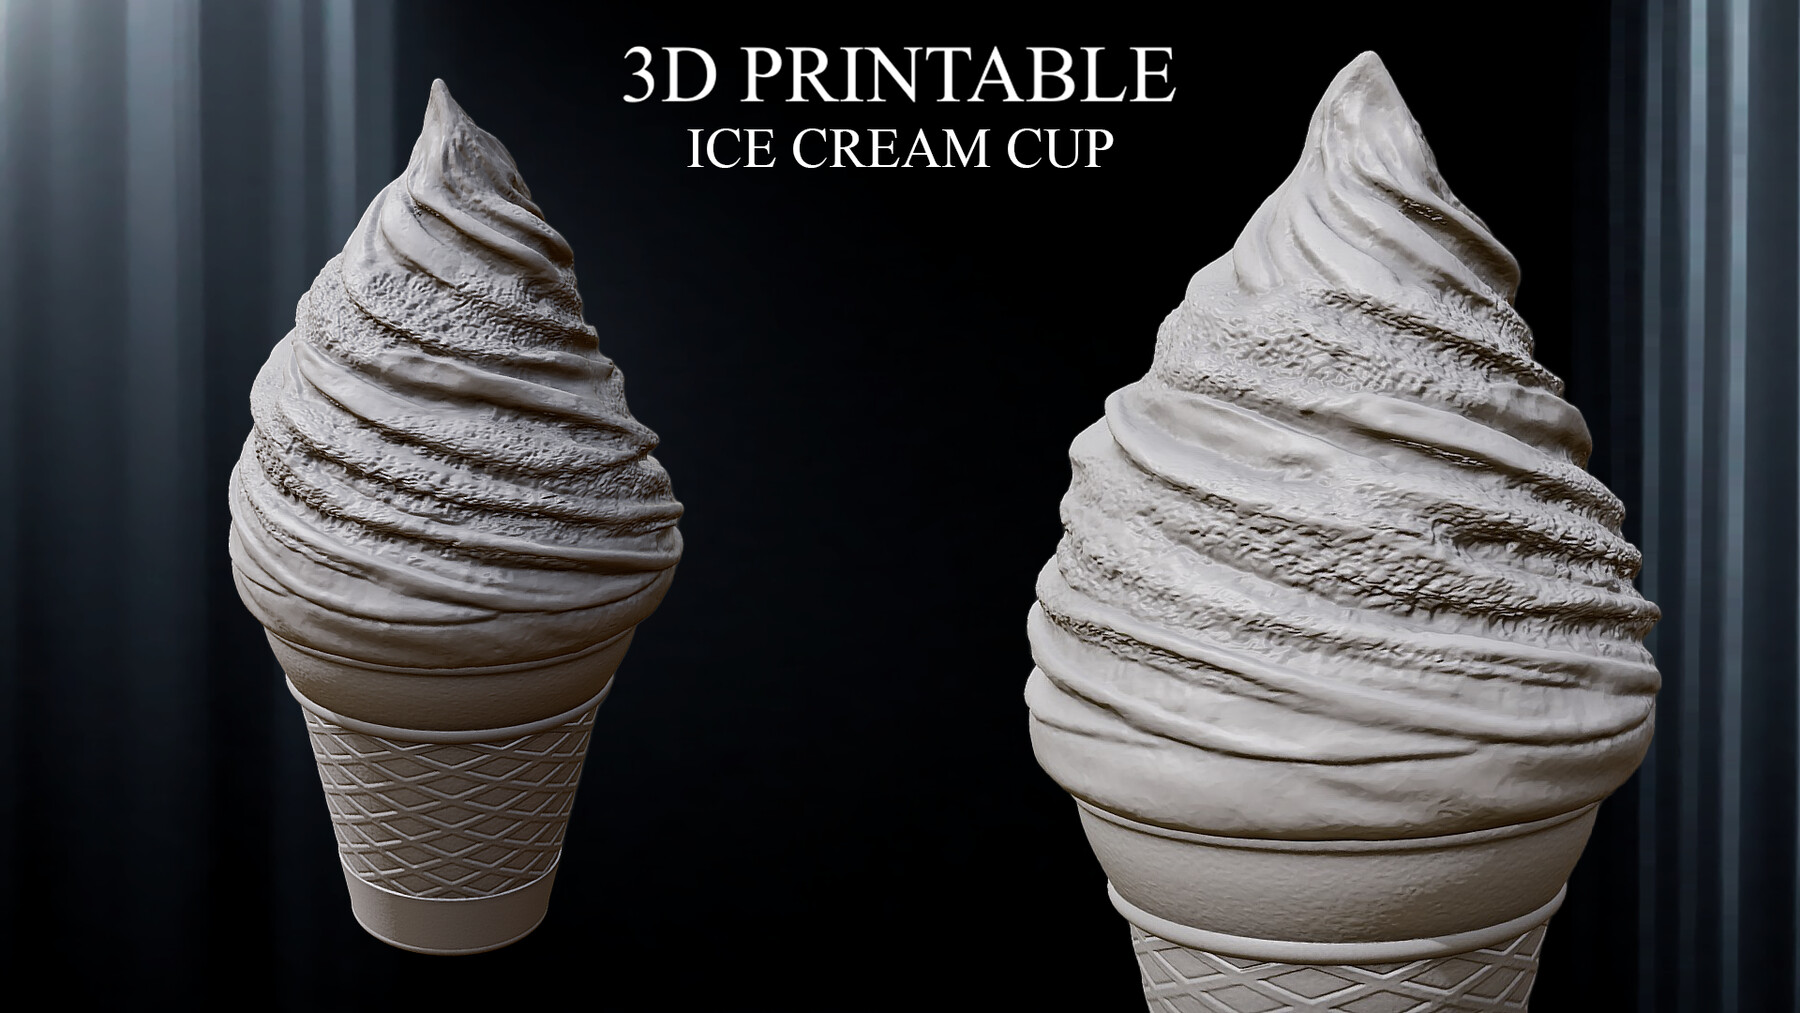 3D PRINTABLE ICE CREAM CUP